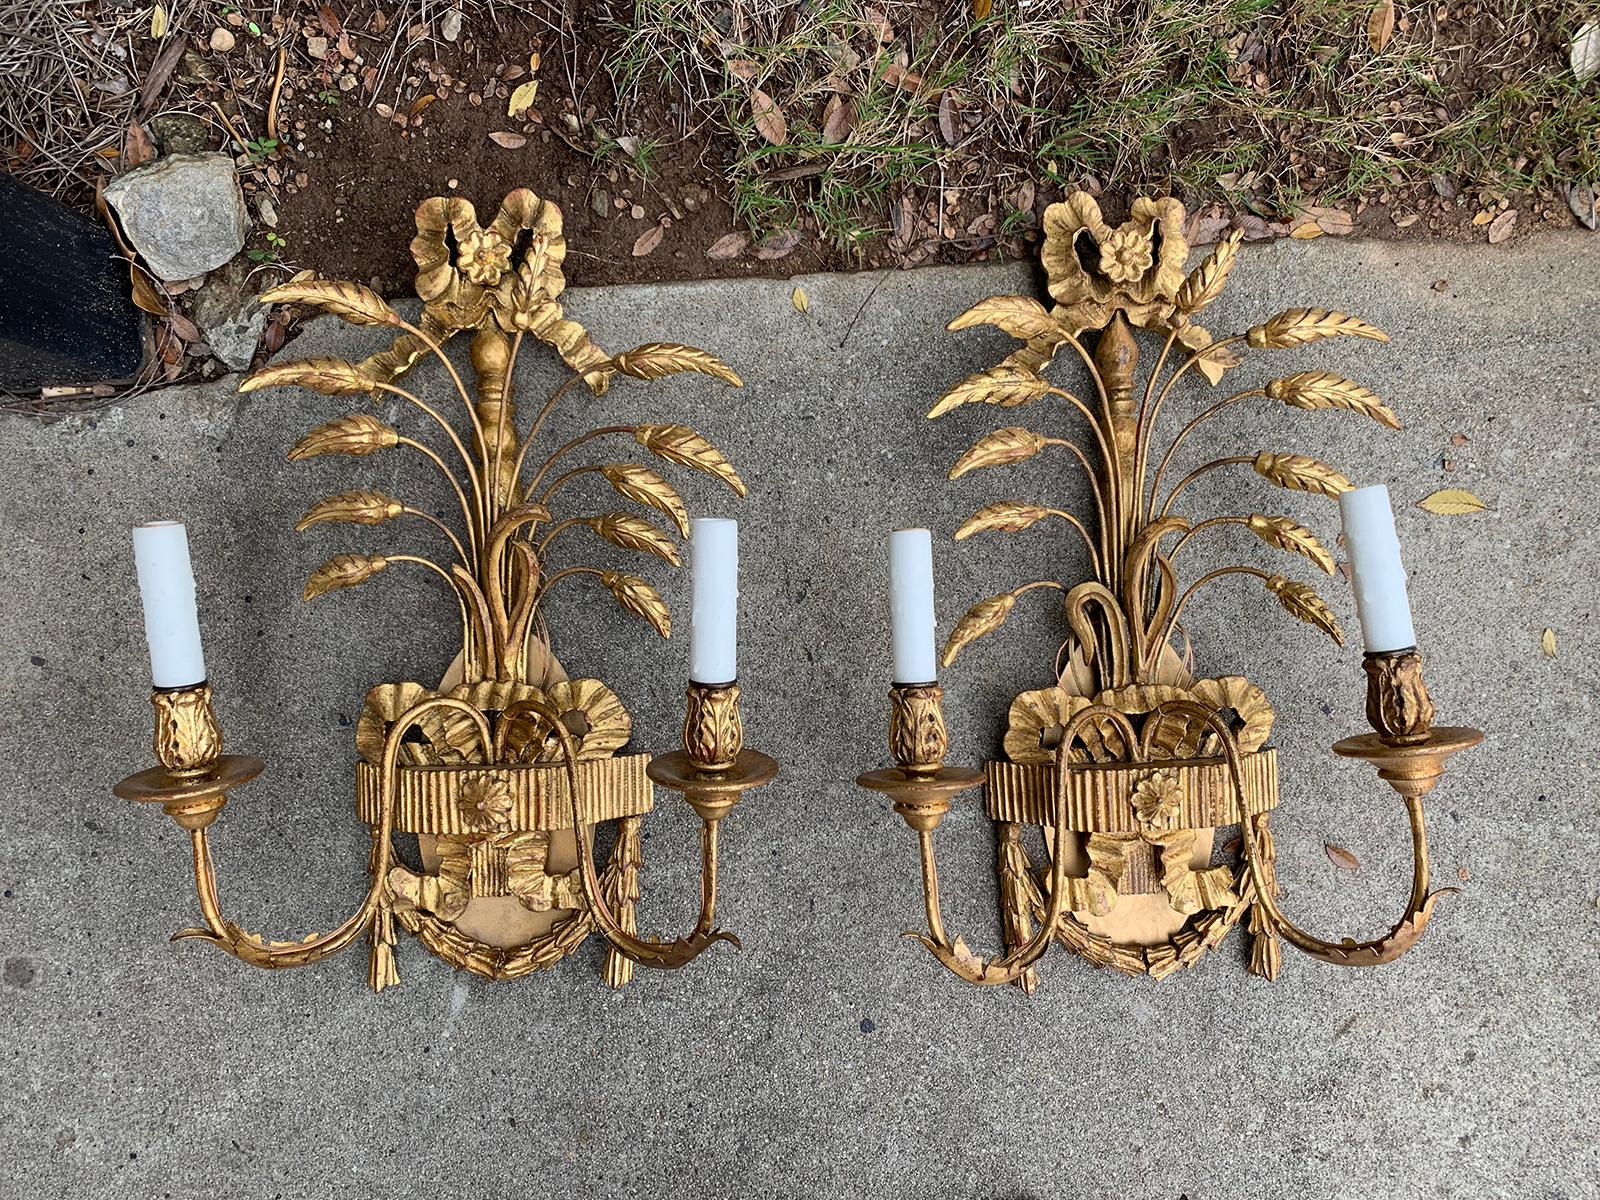 Pair of early 20th century Italian style giltwood two-arm sconces with wheat & ribbon detail, possibly Caldwell
New wiring.